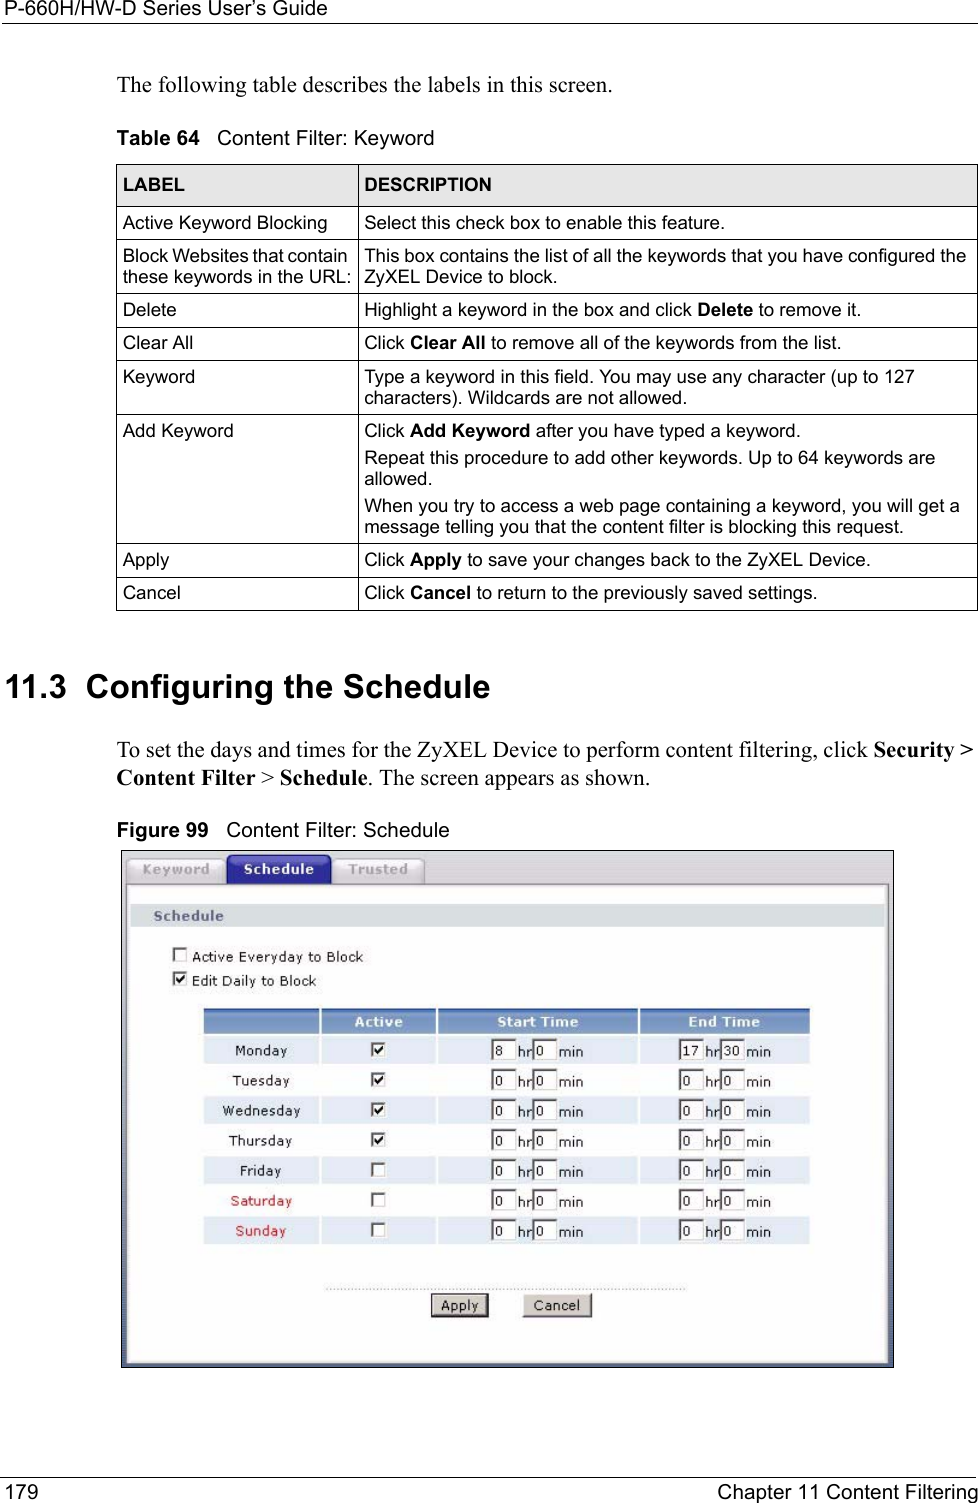 P-660H/HW-D Series User’s Guide179 Chapter 11 Content FilteringThe following table describes the labels in this screen.  11.3  Configuring the Schedule  To set the days and times for the ZyXEL Device to perform content filtering, click Security &gt; Content Filter &gt; Schedule. The screen appears as shown.Figure 99   Content Filter: ScheduleTable 64   Content Filter: KeywordLABEL DESCRIPTIONActive Keyword Blocking Select this check box to enable this feature.Block Websites that contain these keywords in the URL:This box contains the list of all the keywords that you have configured the ZyXEL Device to block. Delete  Highlight a keyword in the box and click Delete to remove it. Clear All  Click Clear All to remove all of the keywords from the list.Keyword Type a keyword in this field. You may use any character (up to 127 characters). Wildcards are not allowed.Add Keyword Click Add Keyword after you have typed a keyword. Repeat this procedure to add other keywords. Up to 64 keywords are allowed.When you try to access a web page containing a keyword, you will get a message telling you that the content filter is blocking this request.Apply Click Apply to save your changes back to the ZyXEL Device.Cancel Click Cancel to return to the previously saved settings.